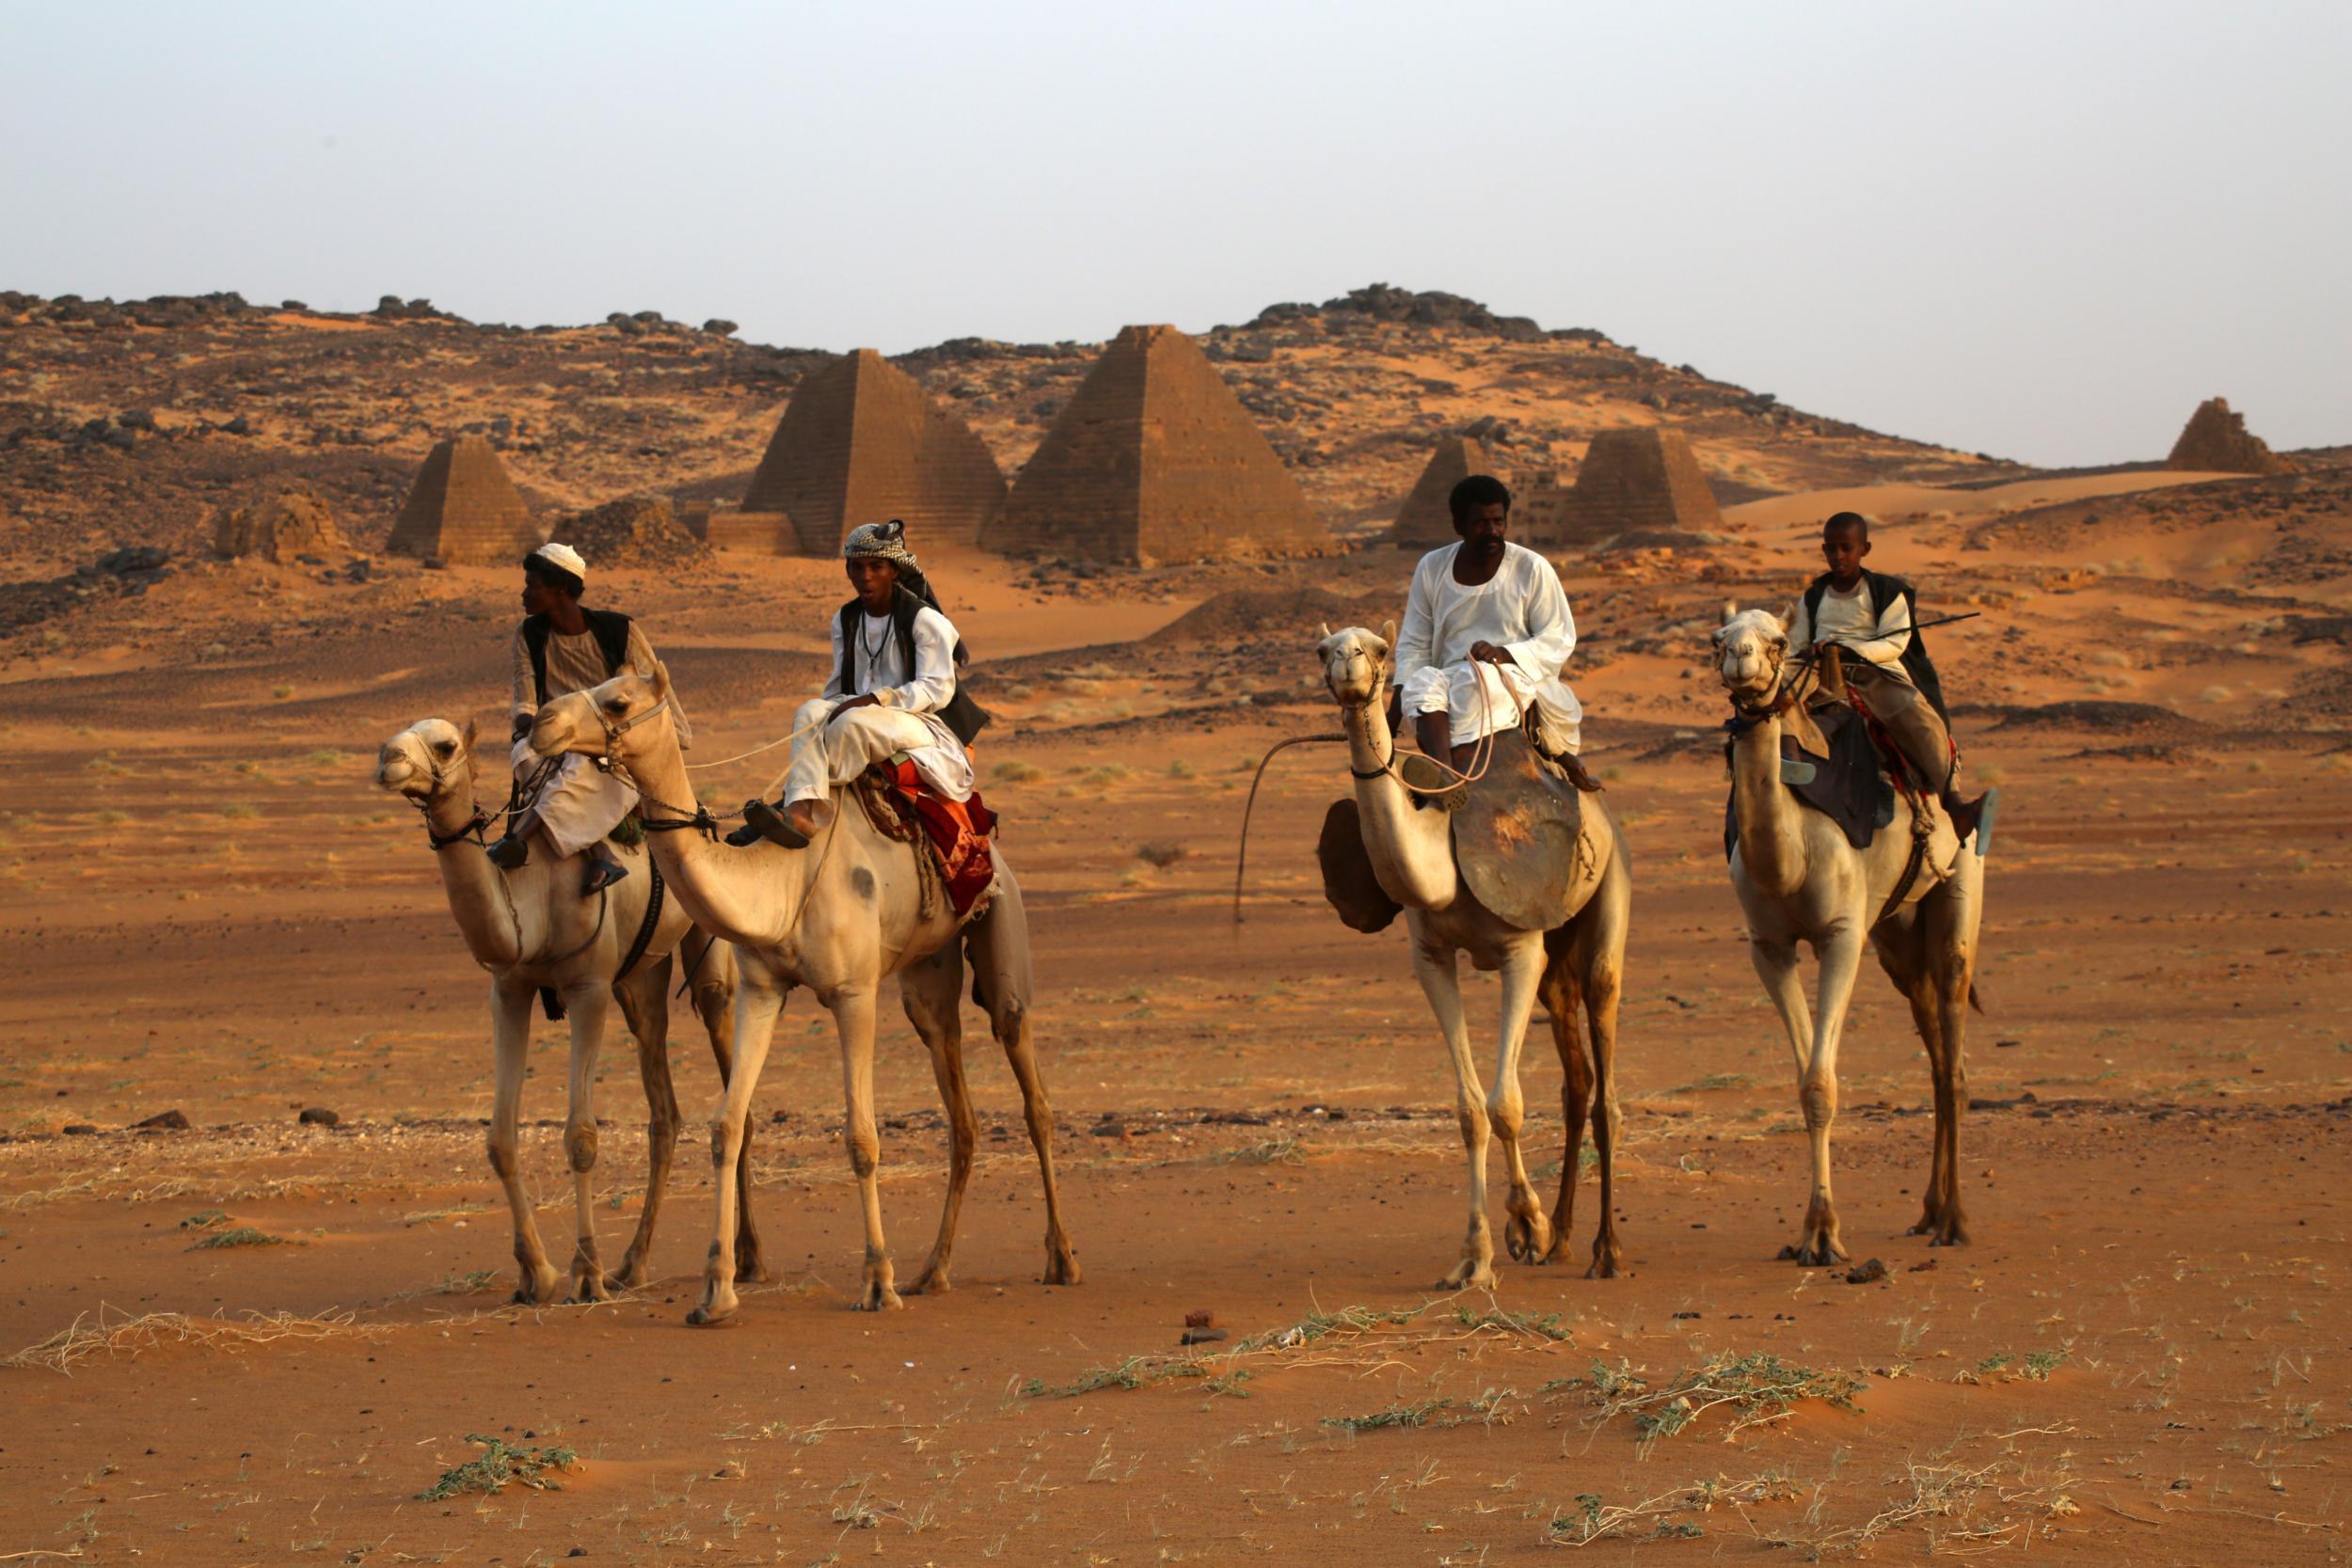 Sudan has hundreds of pyramids scattered across its deserts